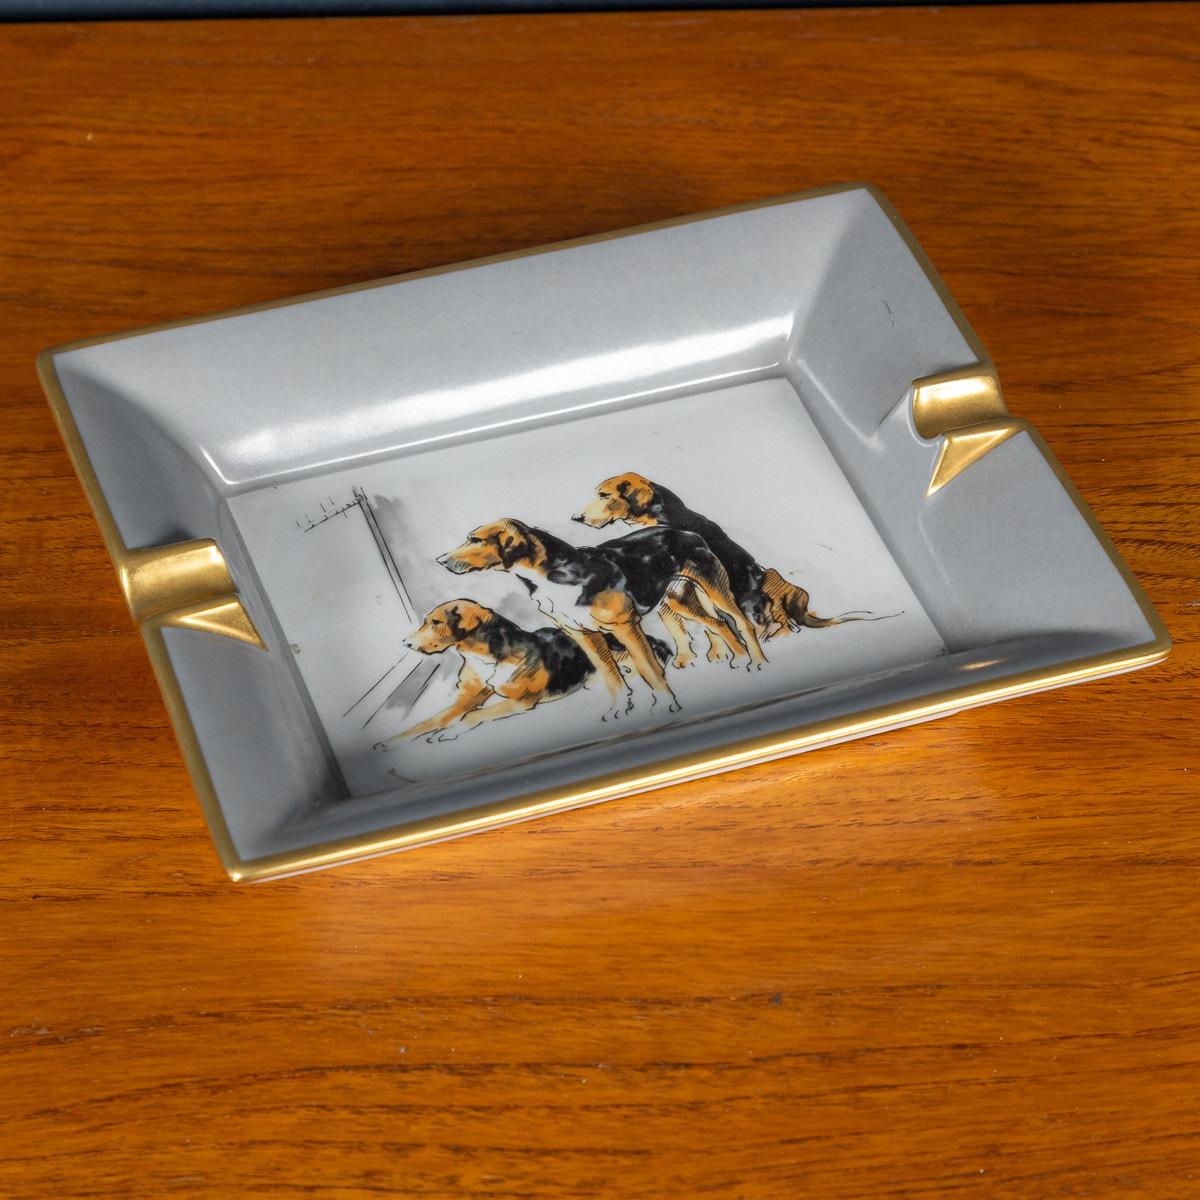 A ceramic ashtray by Hermes, made in France in the latter half of the 20th century. These ashtrays have always been very collectable with the vintage models in particular. This one has a lovely dog theme, a lovely decorative addition to any home and